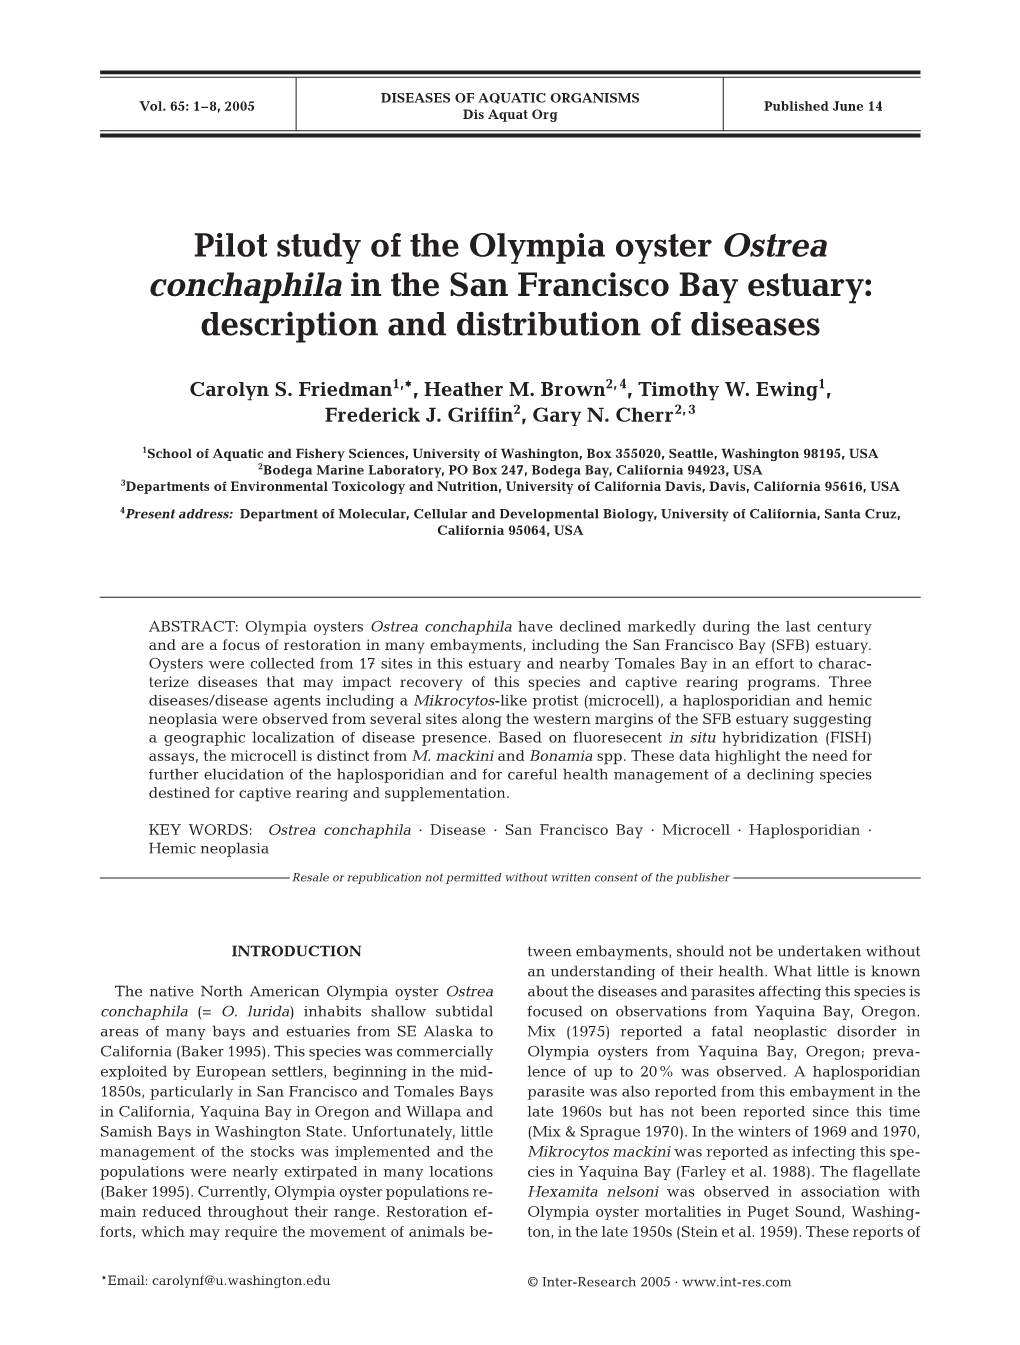 Pilot Study of the Olympia Oyster Ostrea Conchaphila in the San Francisco Bay Estuary: Description and Distribution of Diseases